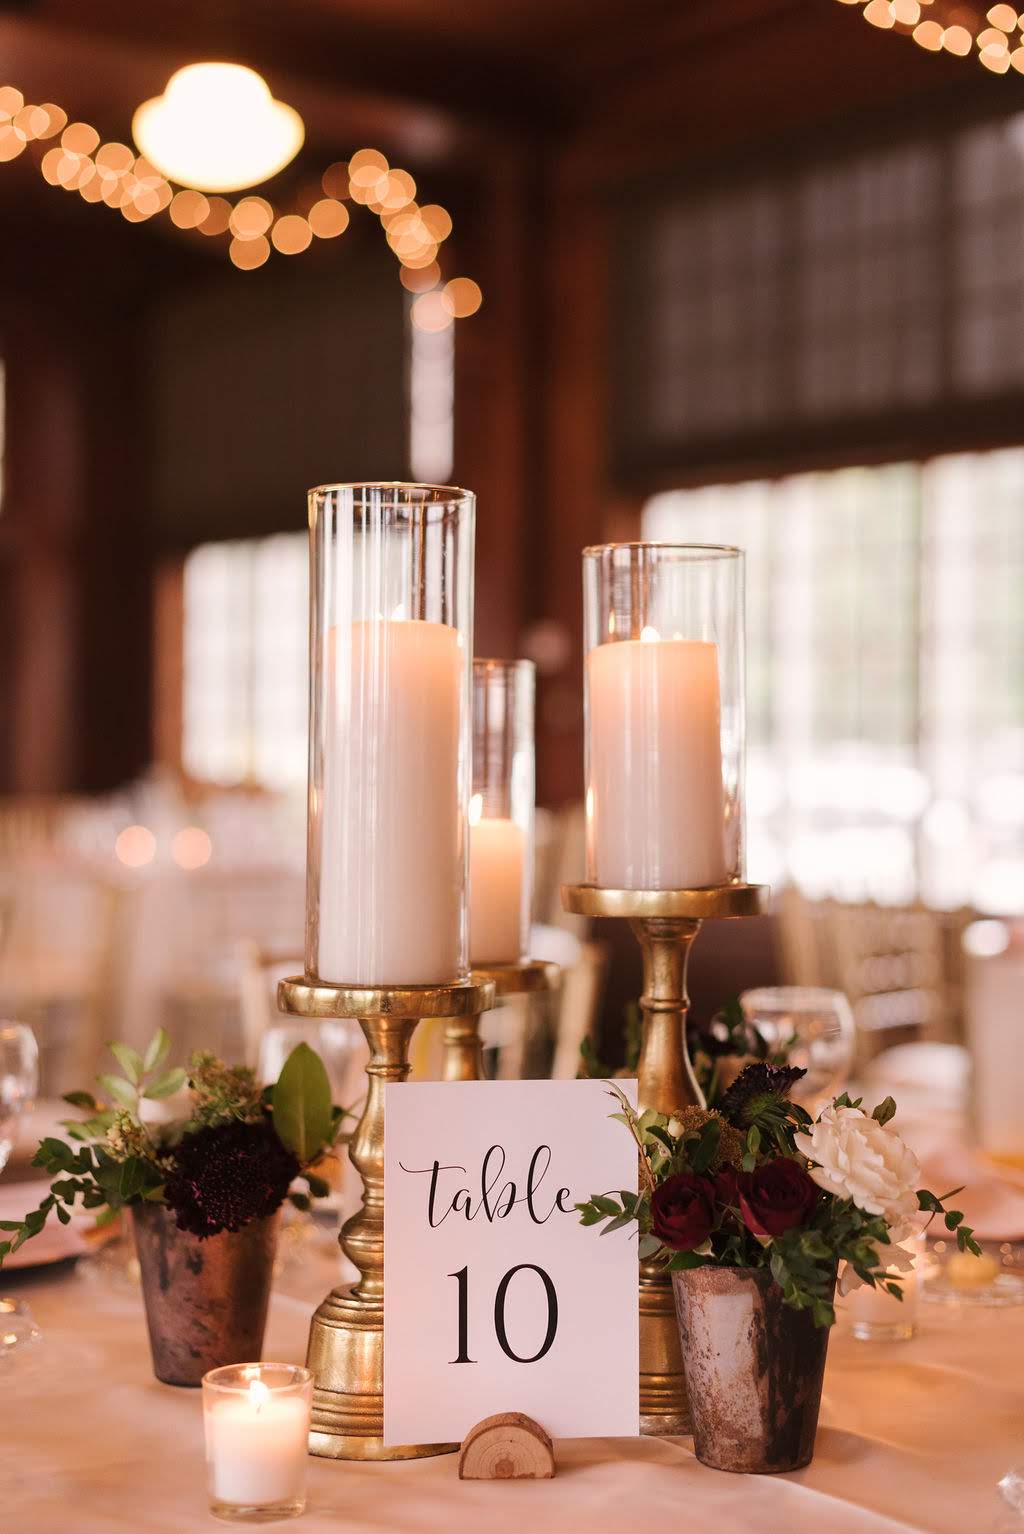 Pillar candles, votive candles and bud vases scattered around the room added a warm candlelit glow.